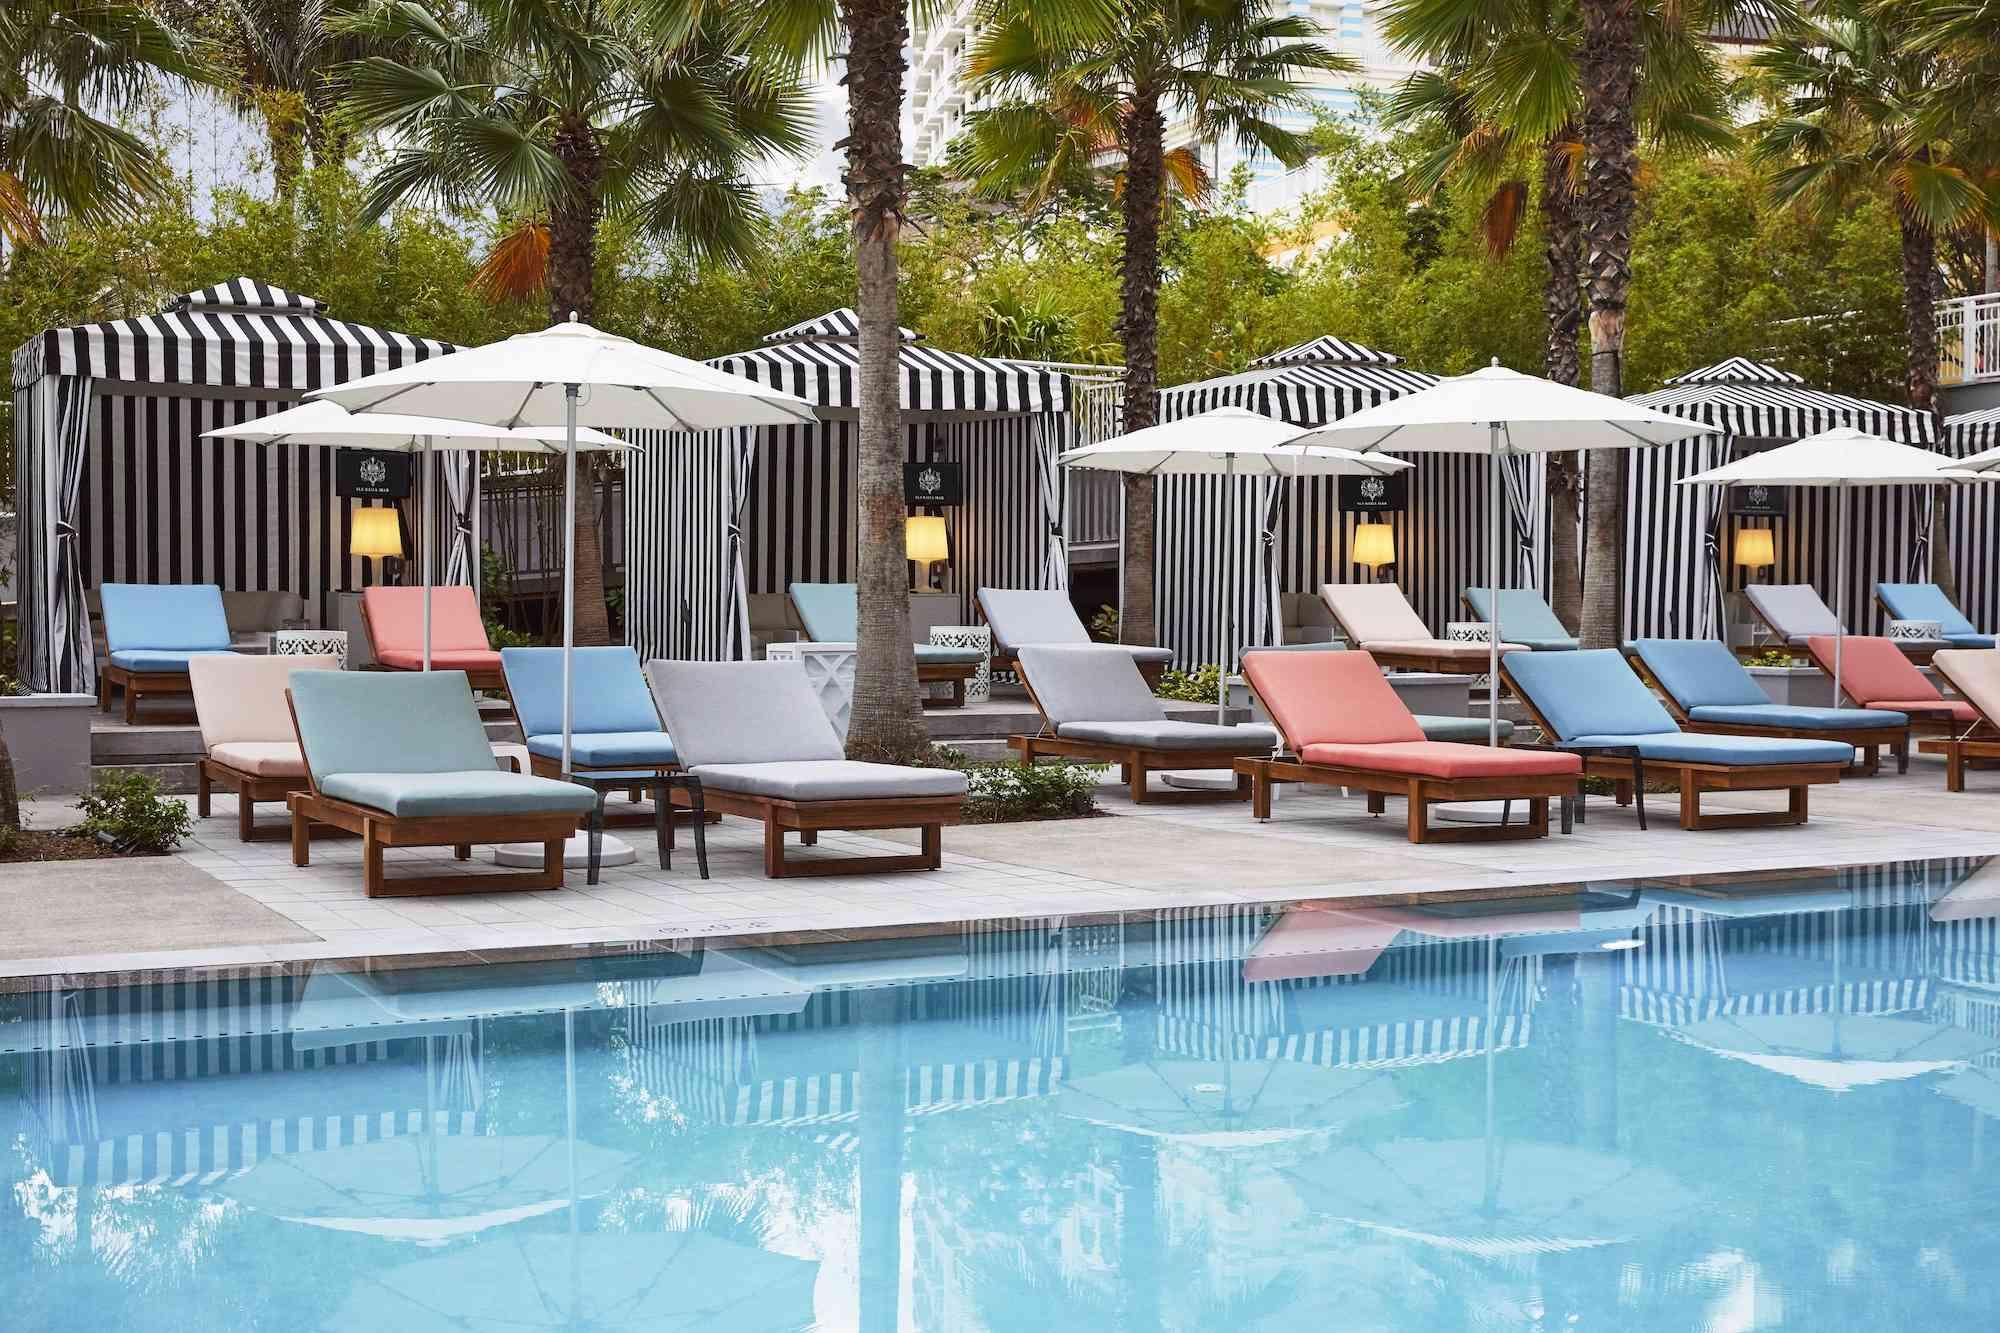 Cabanas by a pool